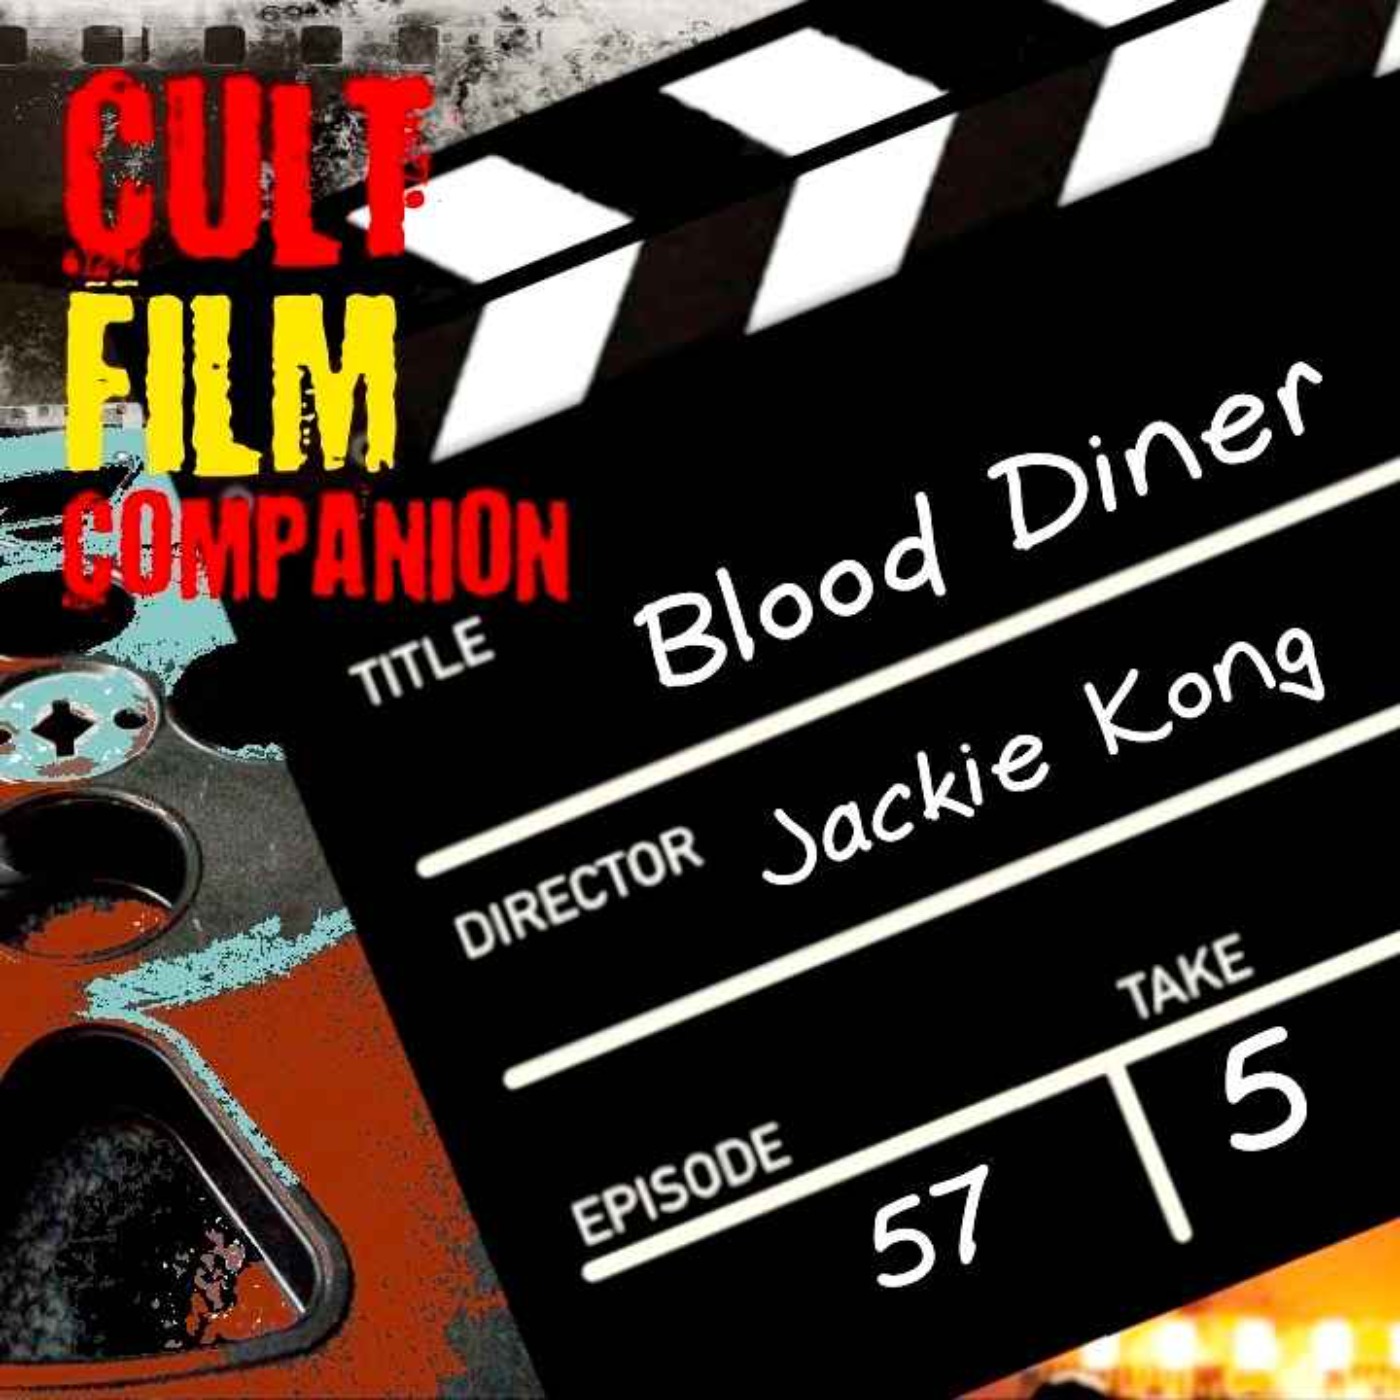 cover art for Ep. 57 Blood Diner directed by Jackie Kong